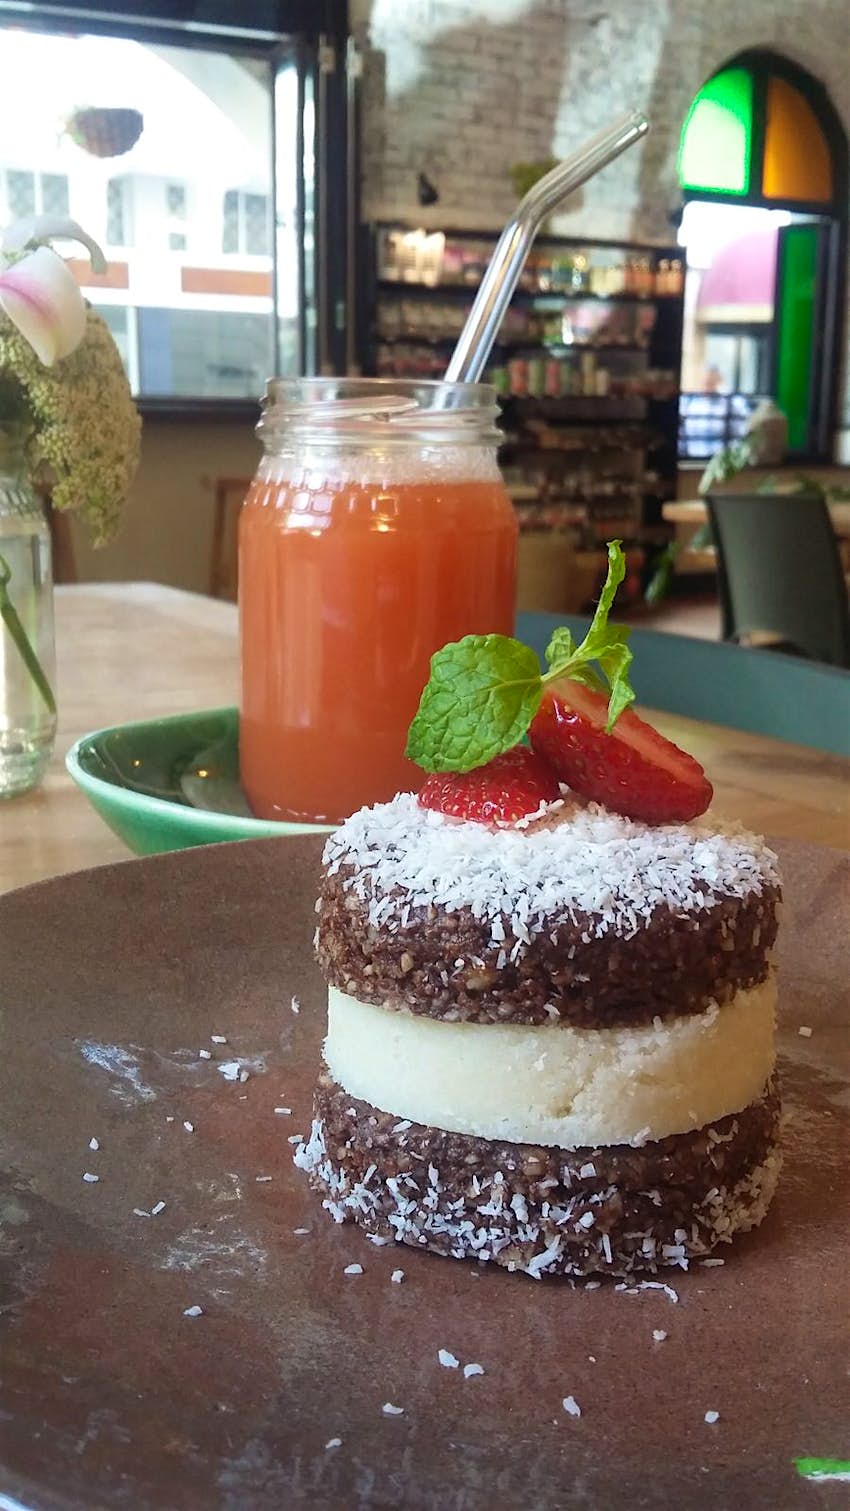 A jam jar full of tomato-looking juice sits behind a three-layered desert; the chocolate top and bottom are separated by a creamy filling; atop the layers is desiccated coconut and two slices of strawberry; with dishes like this, it's easy to see why Raw & Roxy is one of the best vegan restaurants in Cape Town